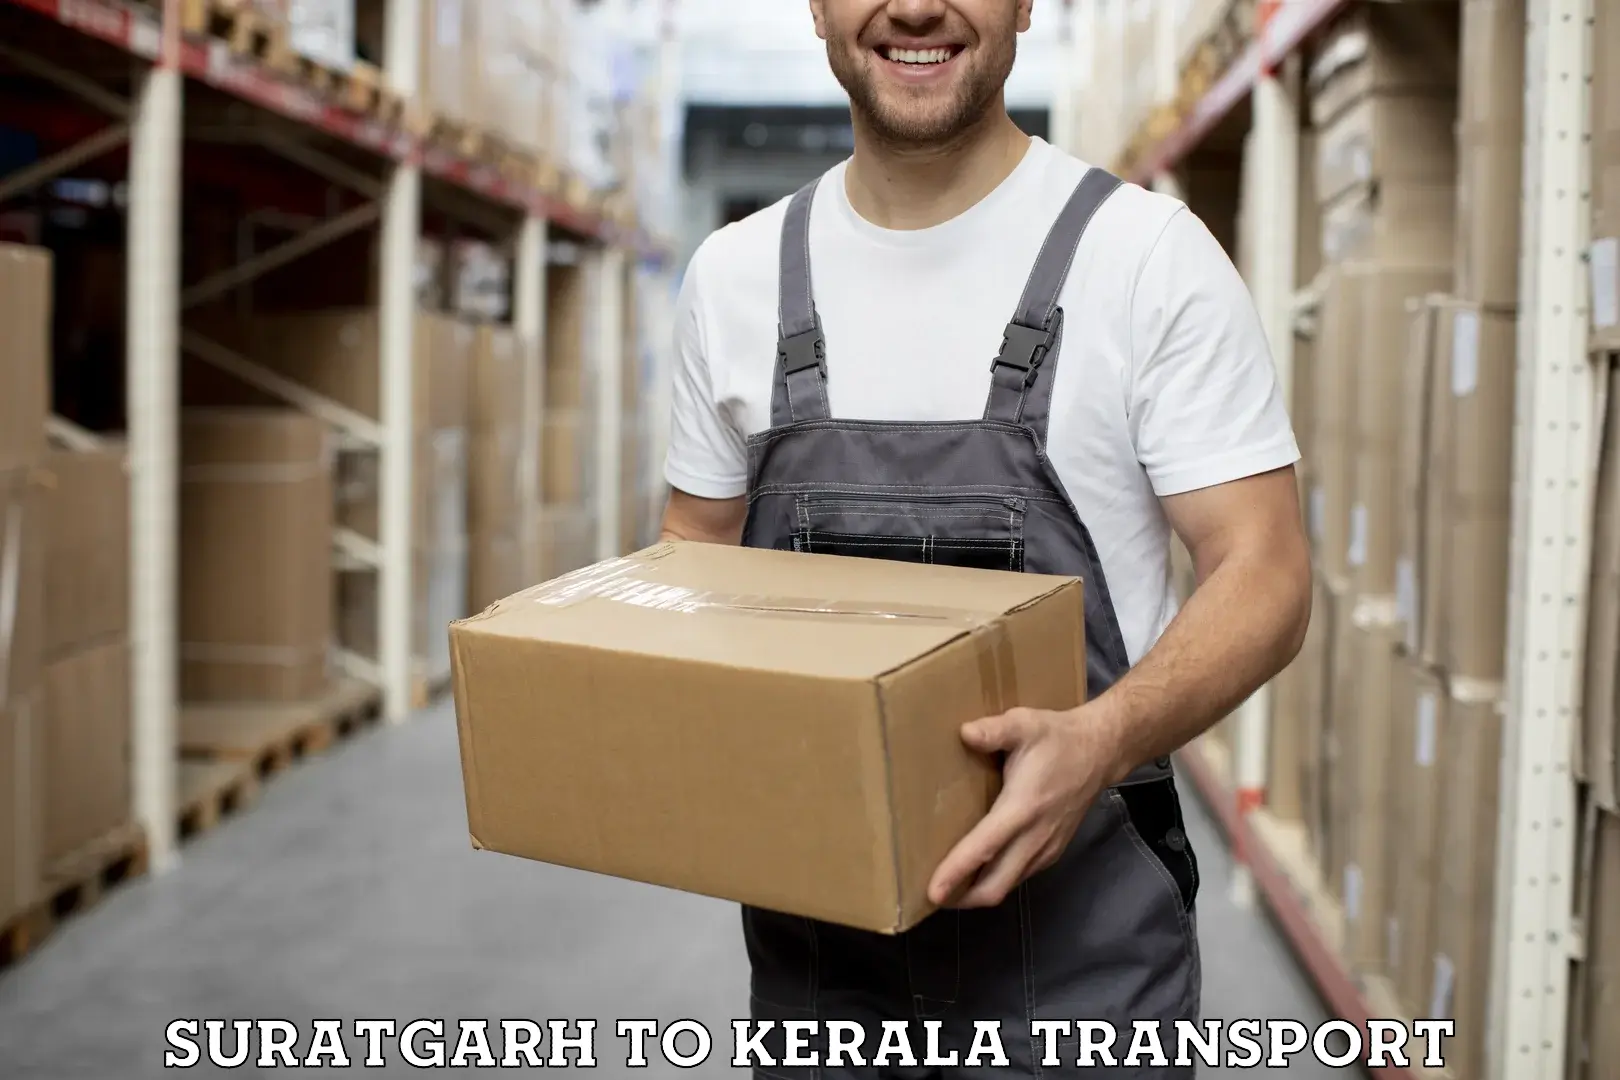 Commercial transport service Suratgarh to Punalur